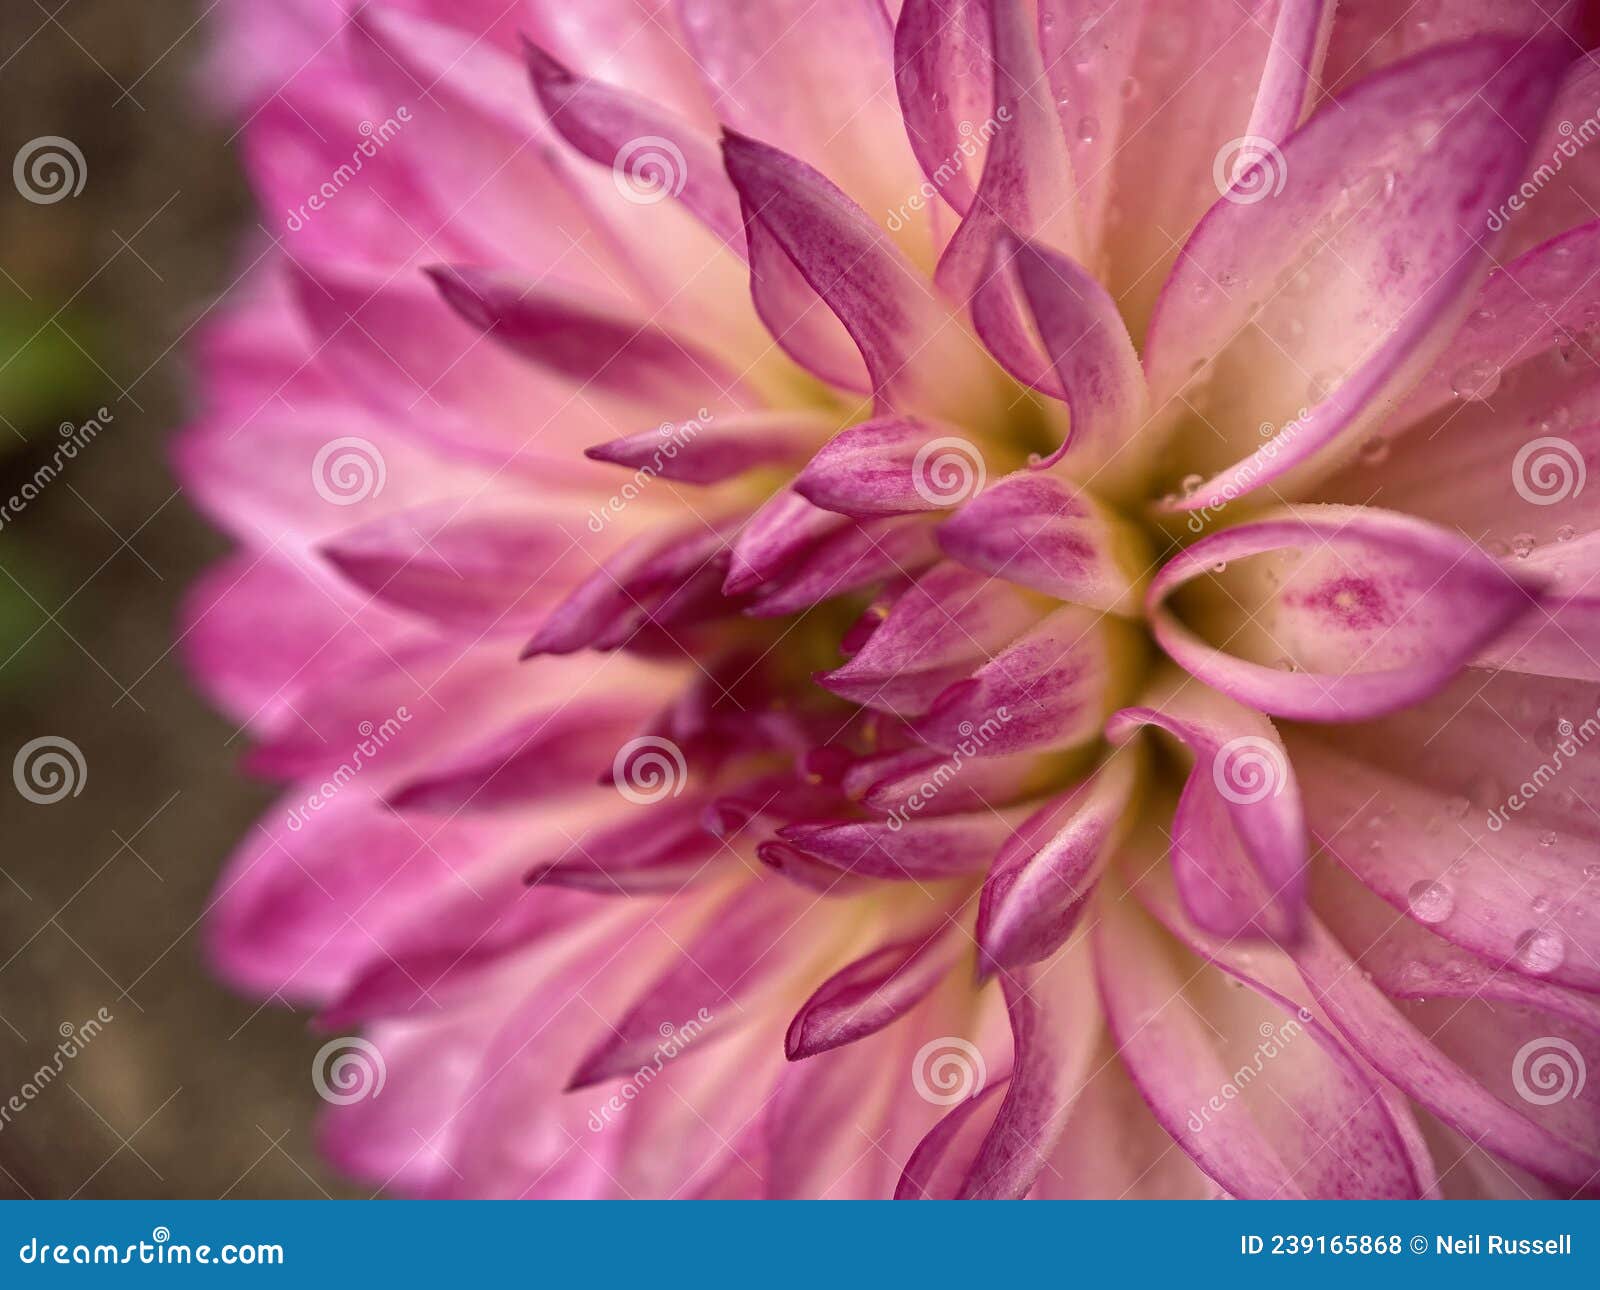 Purple and White Dahlia Flower Stock Photo - Image of details, natural ...